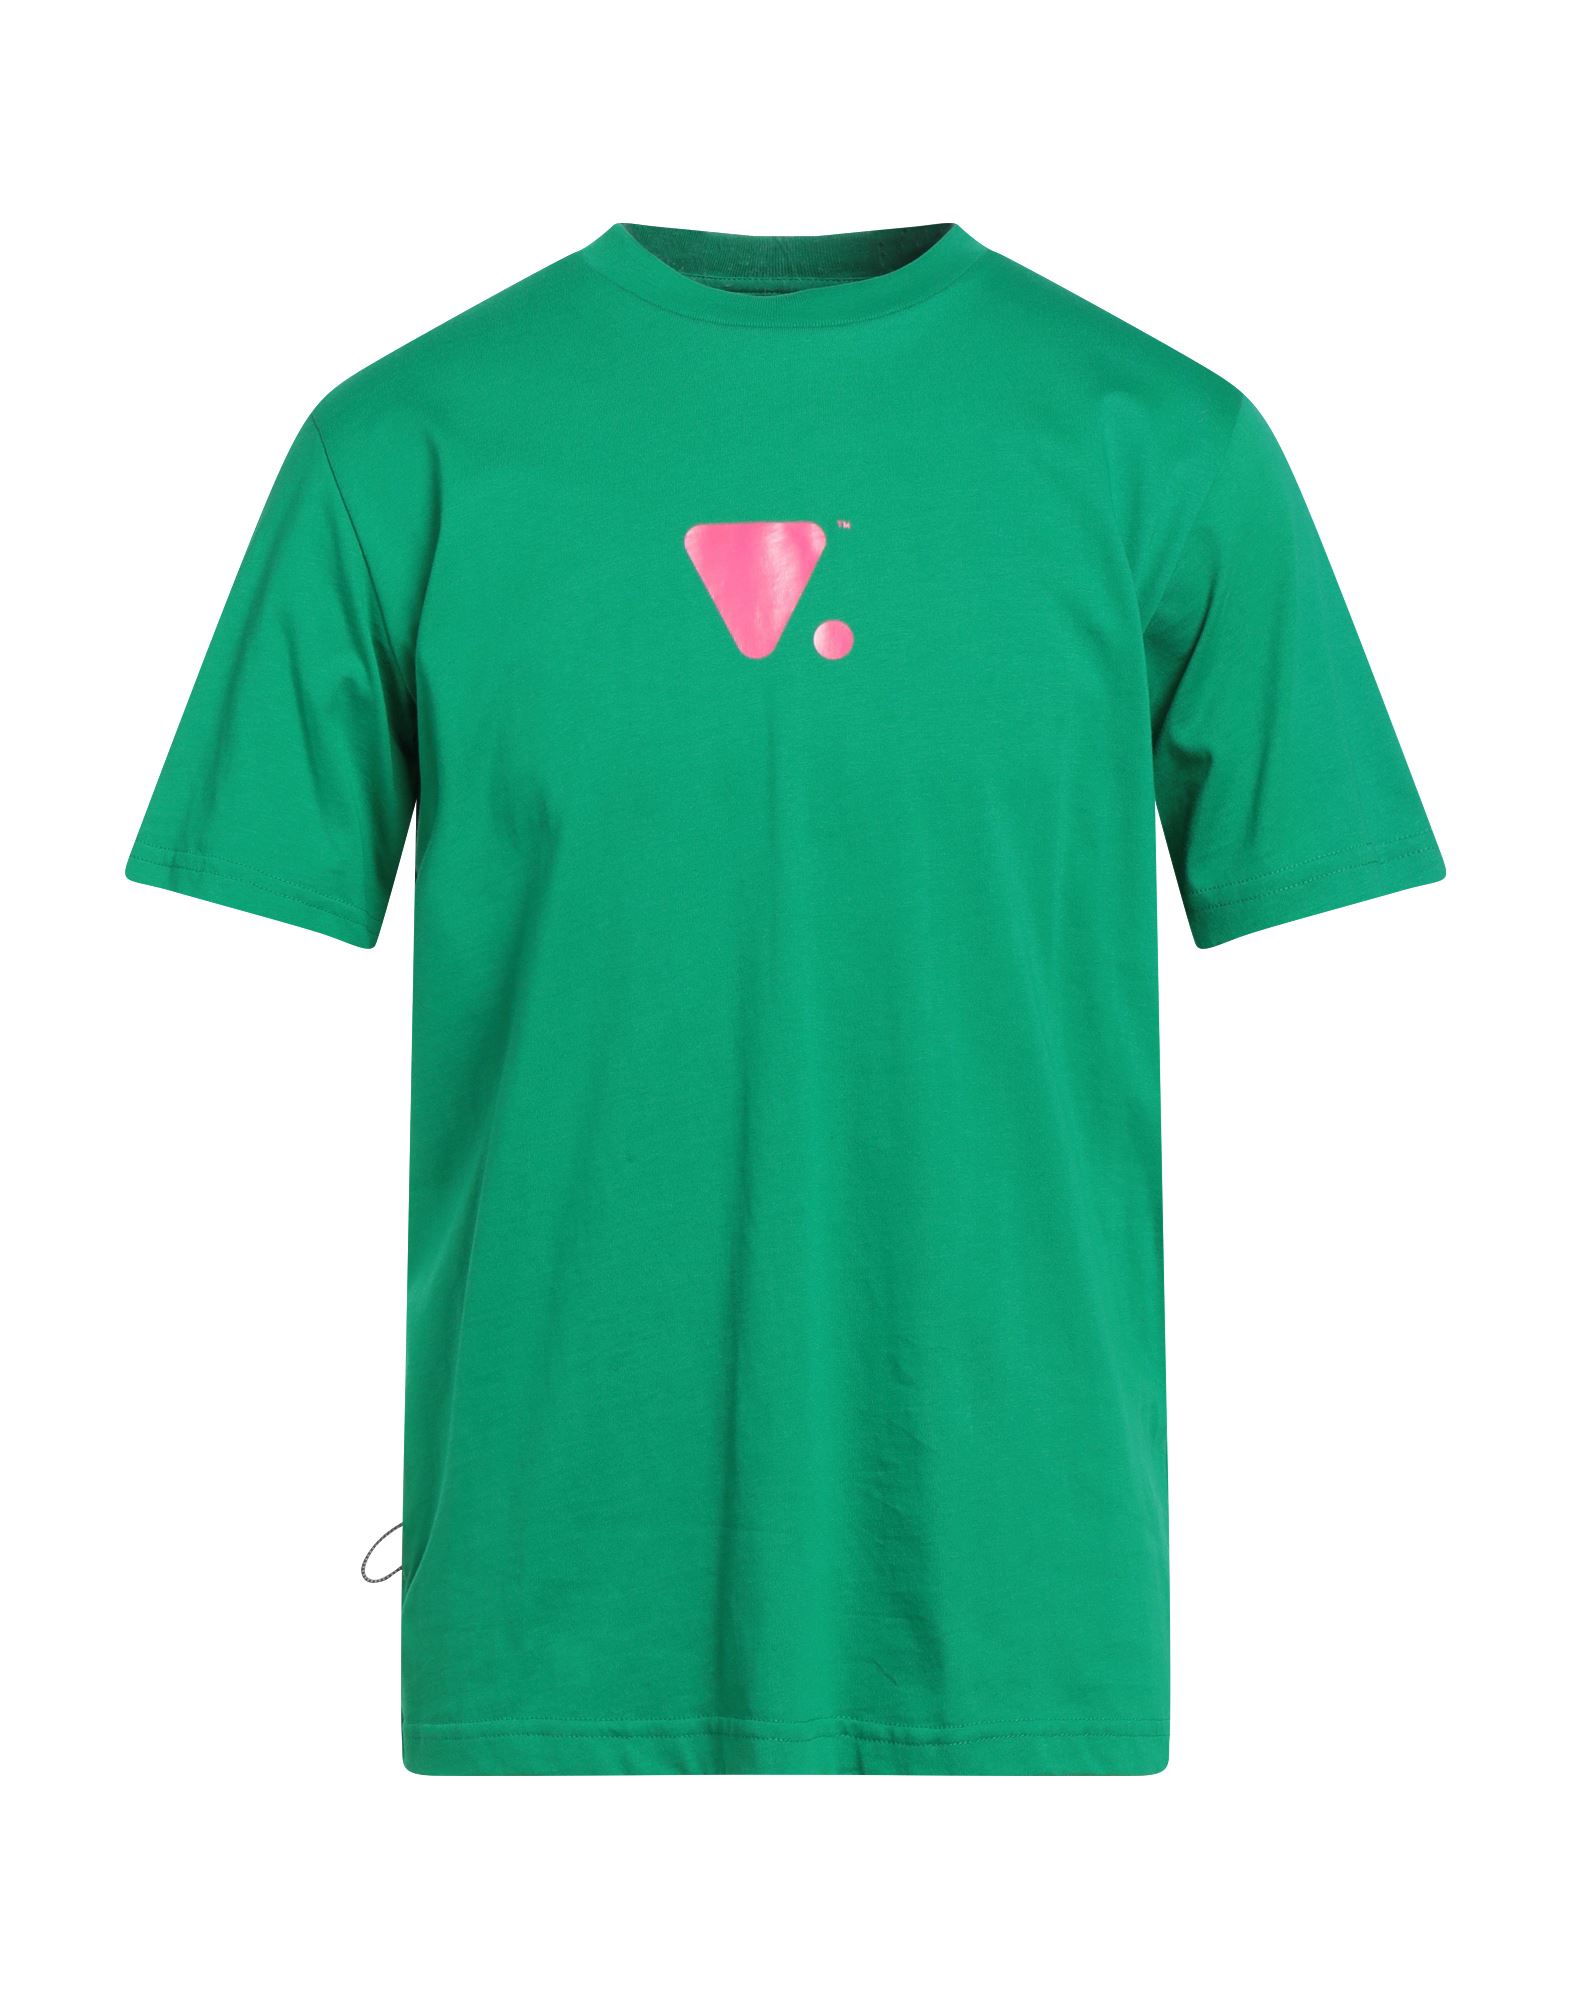 Valvola. T-shirts In Green